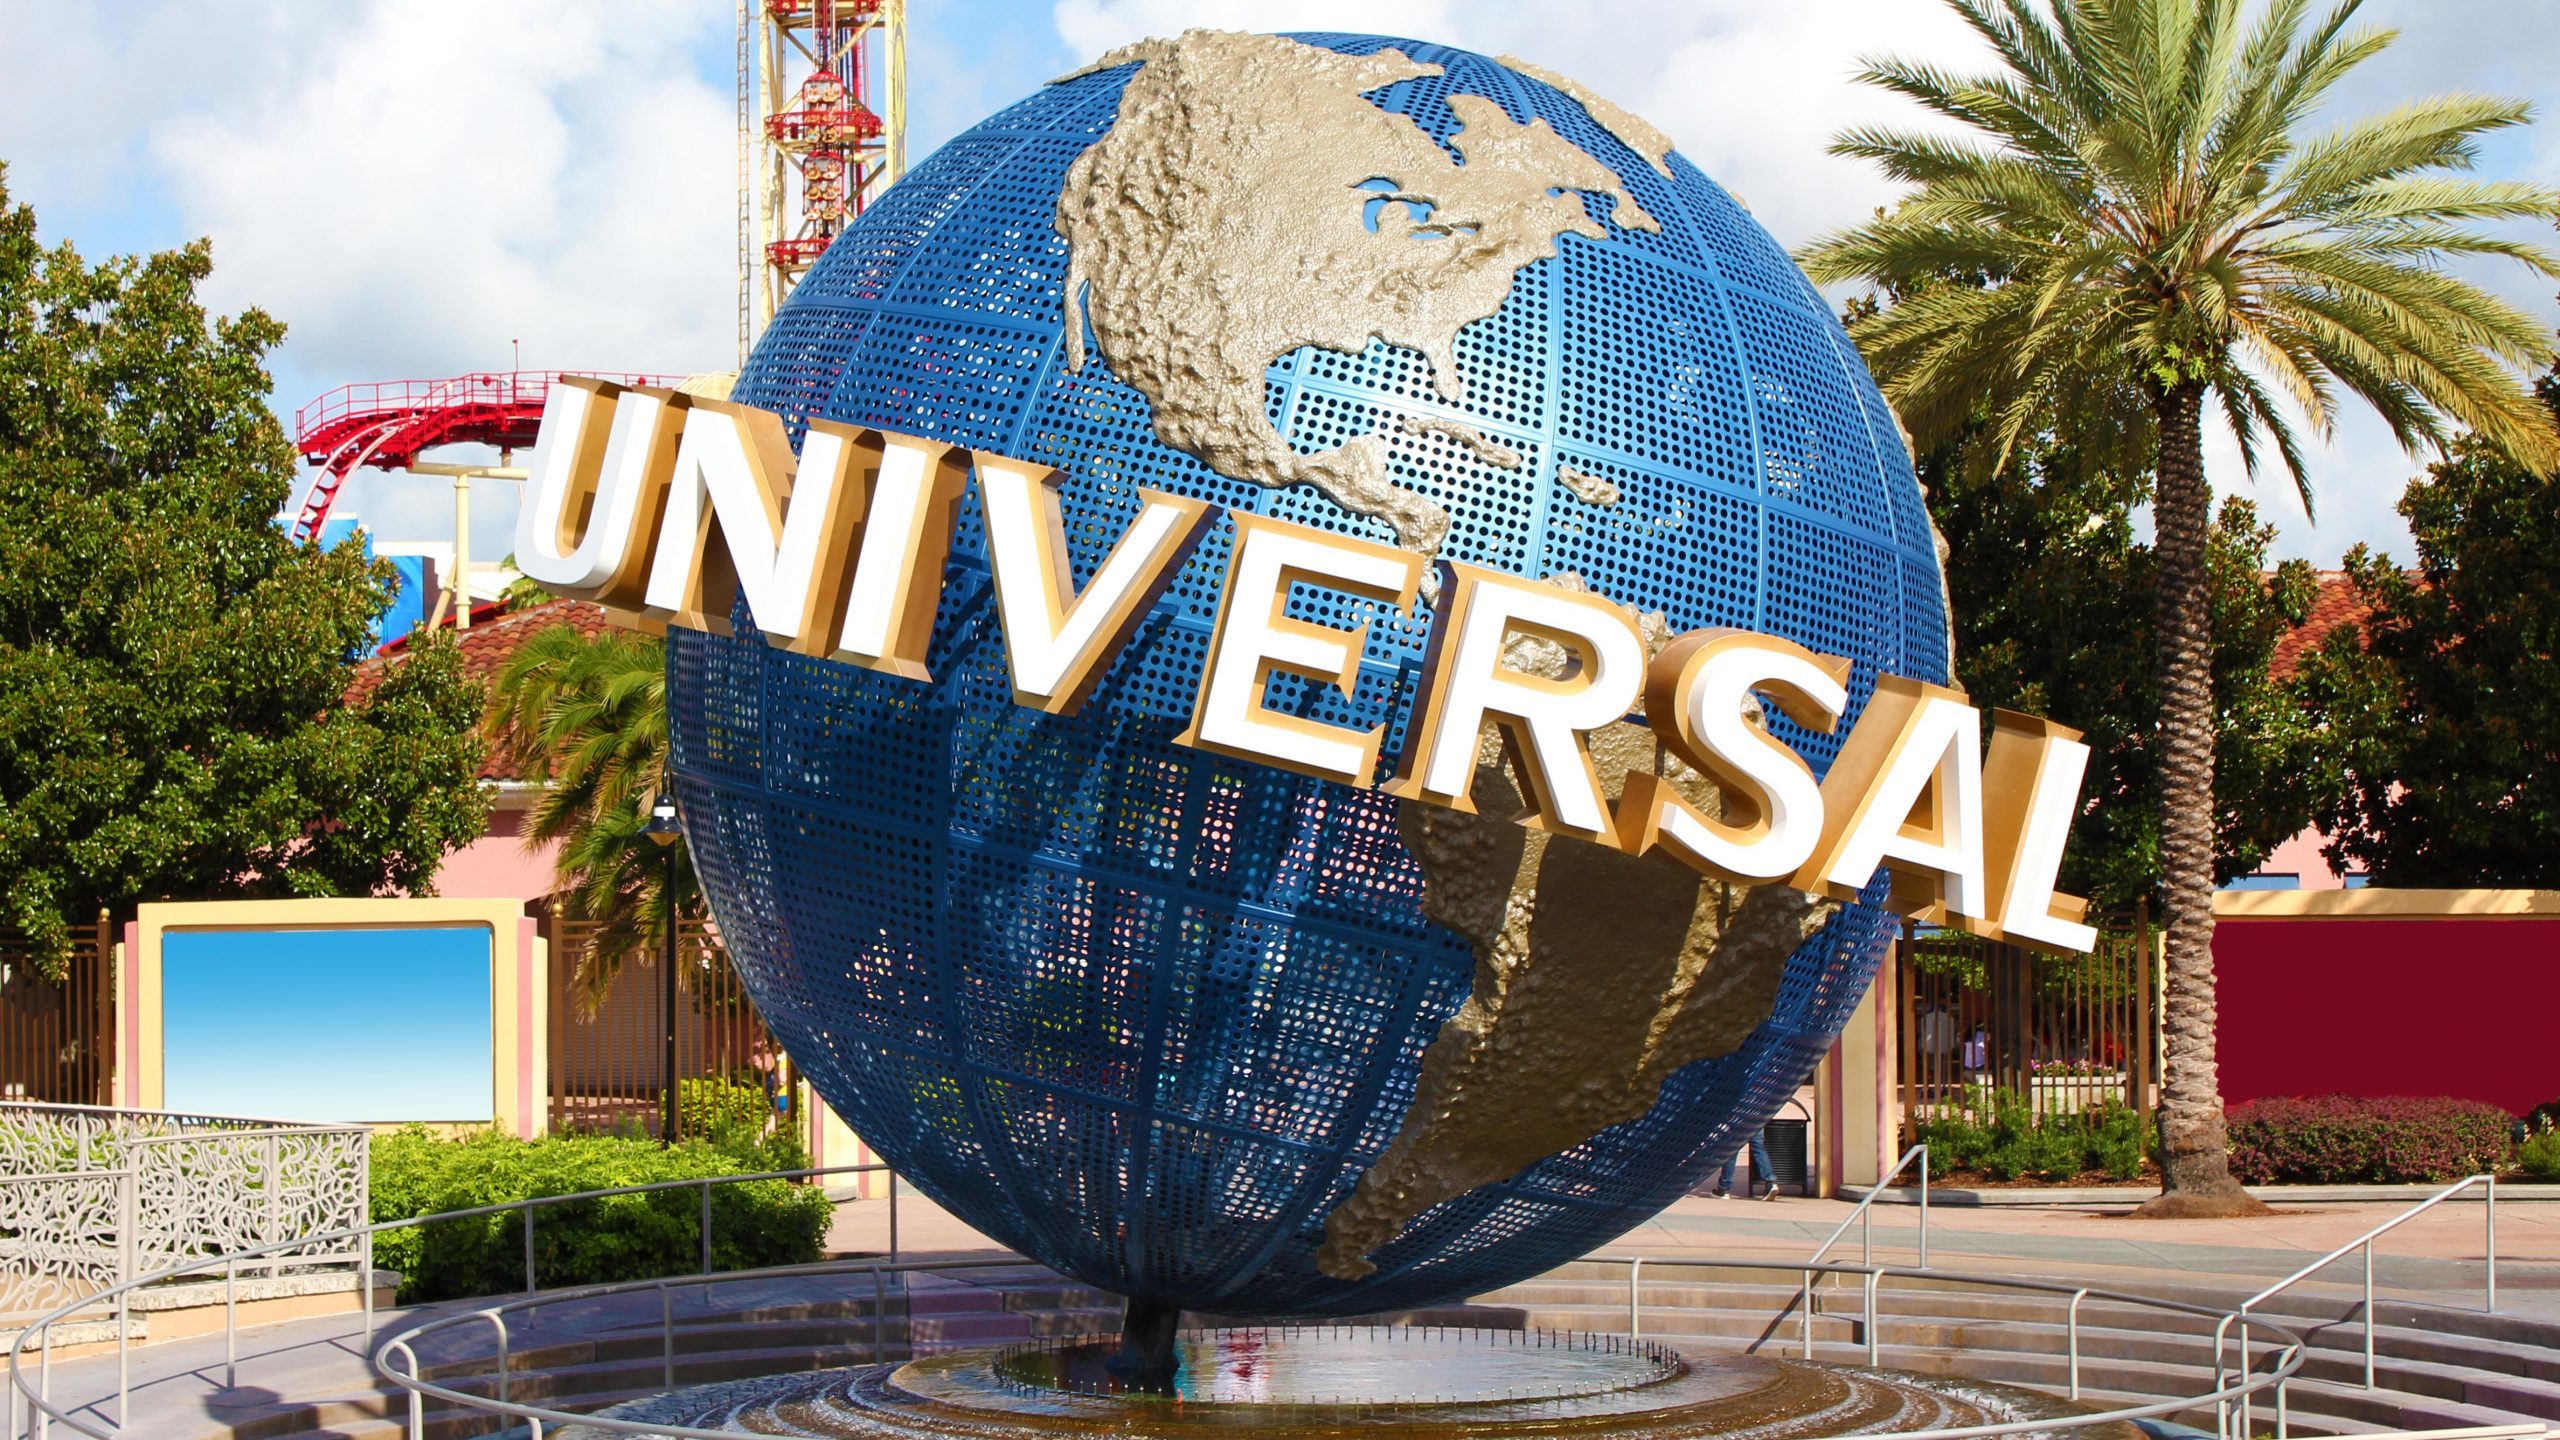 How Much Does It Cost to Go to Universal Studios as a Family? The